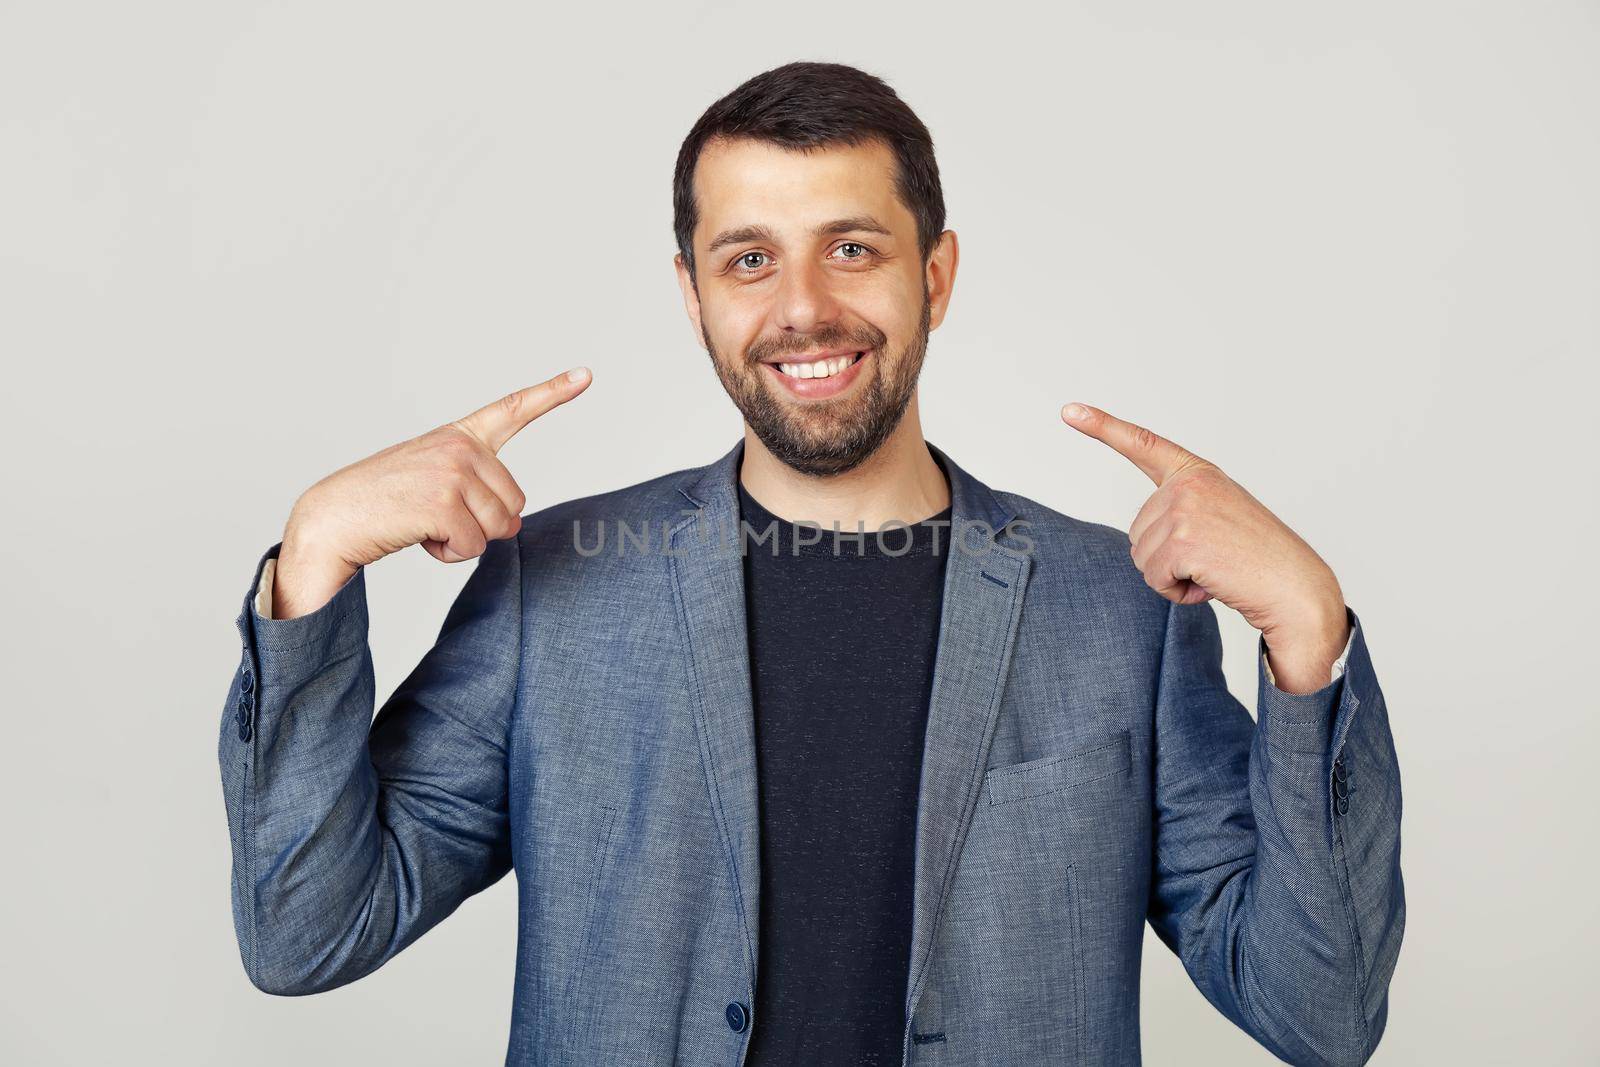 Young businessman man with beard in jacket smiling confidently showing and pointing with fingers teeth and mouth. Health concept. Portrait of a man on a gray background.